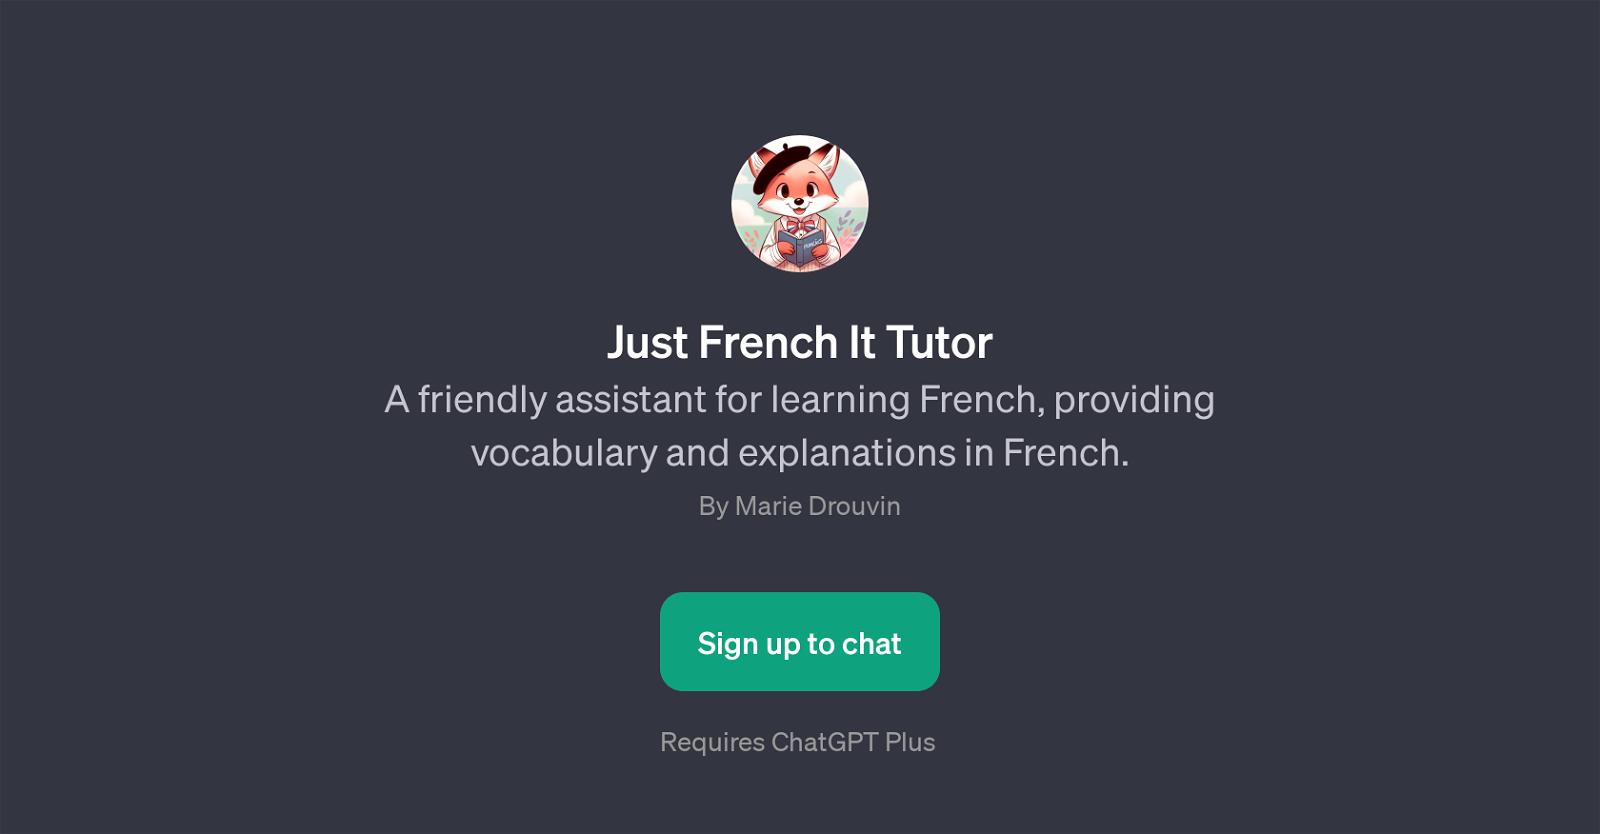 Just French It Tutor website